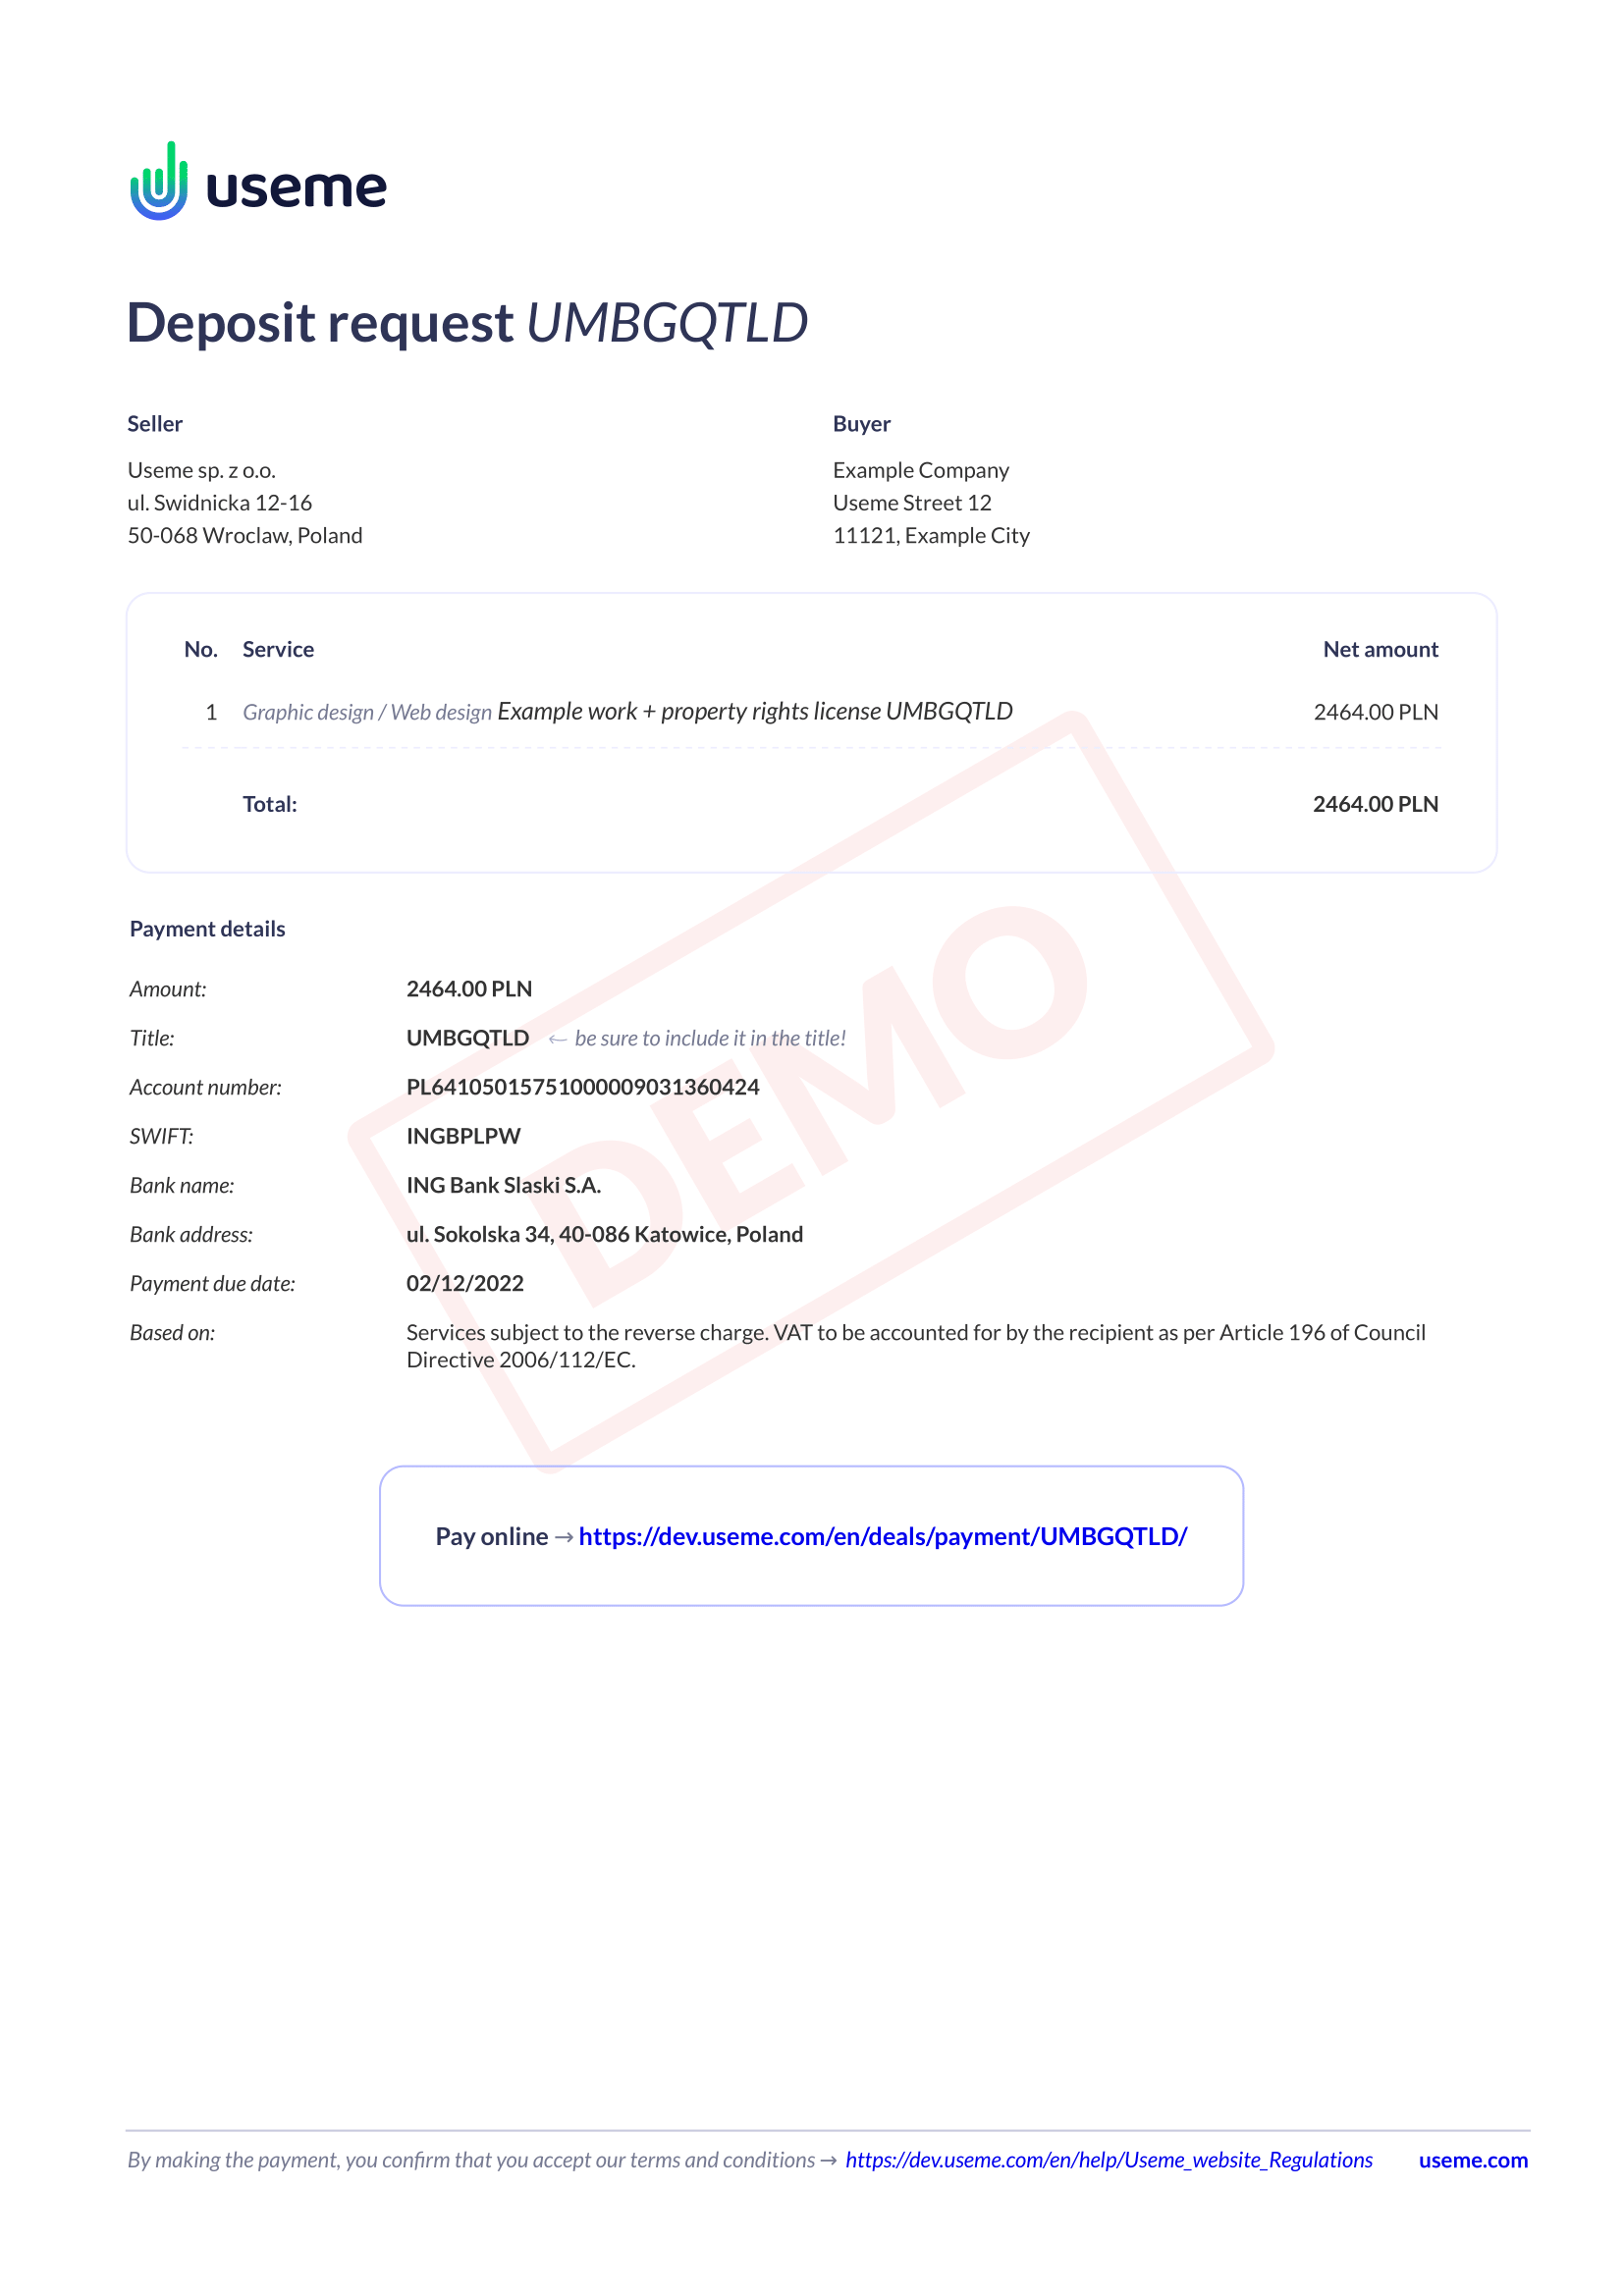 preinvoice-UMBGQTLD-1.png